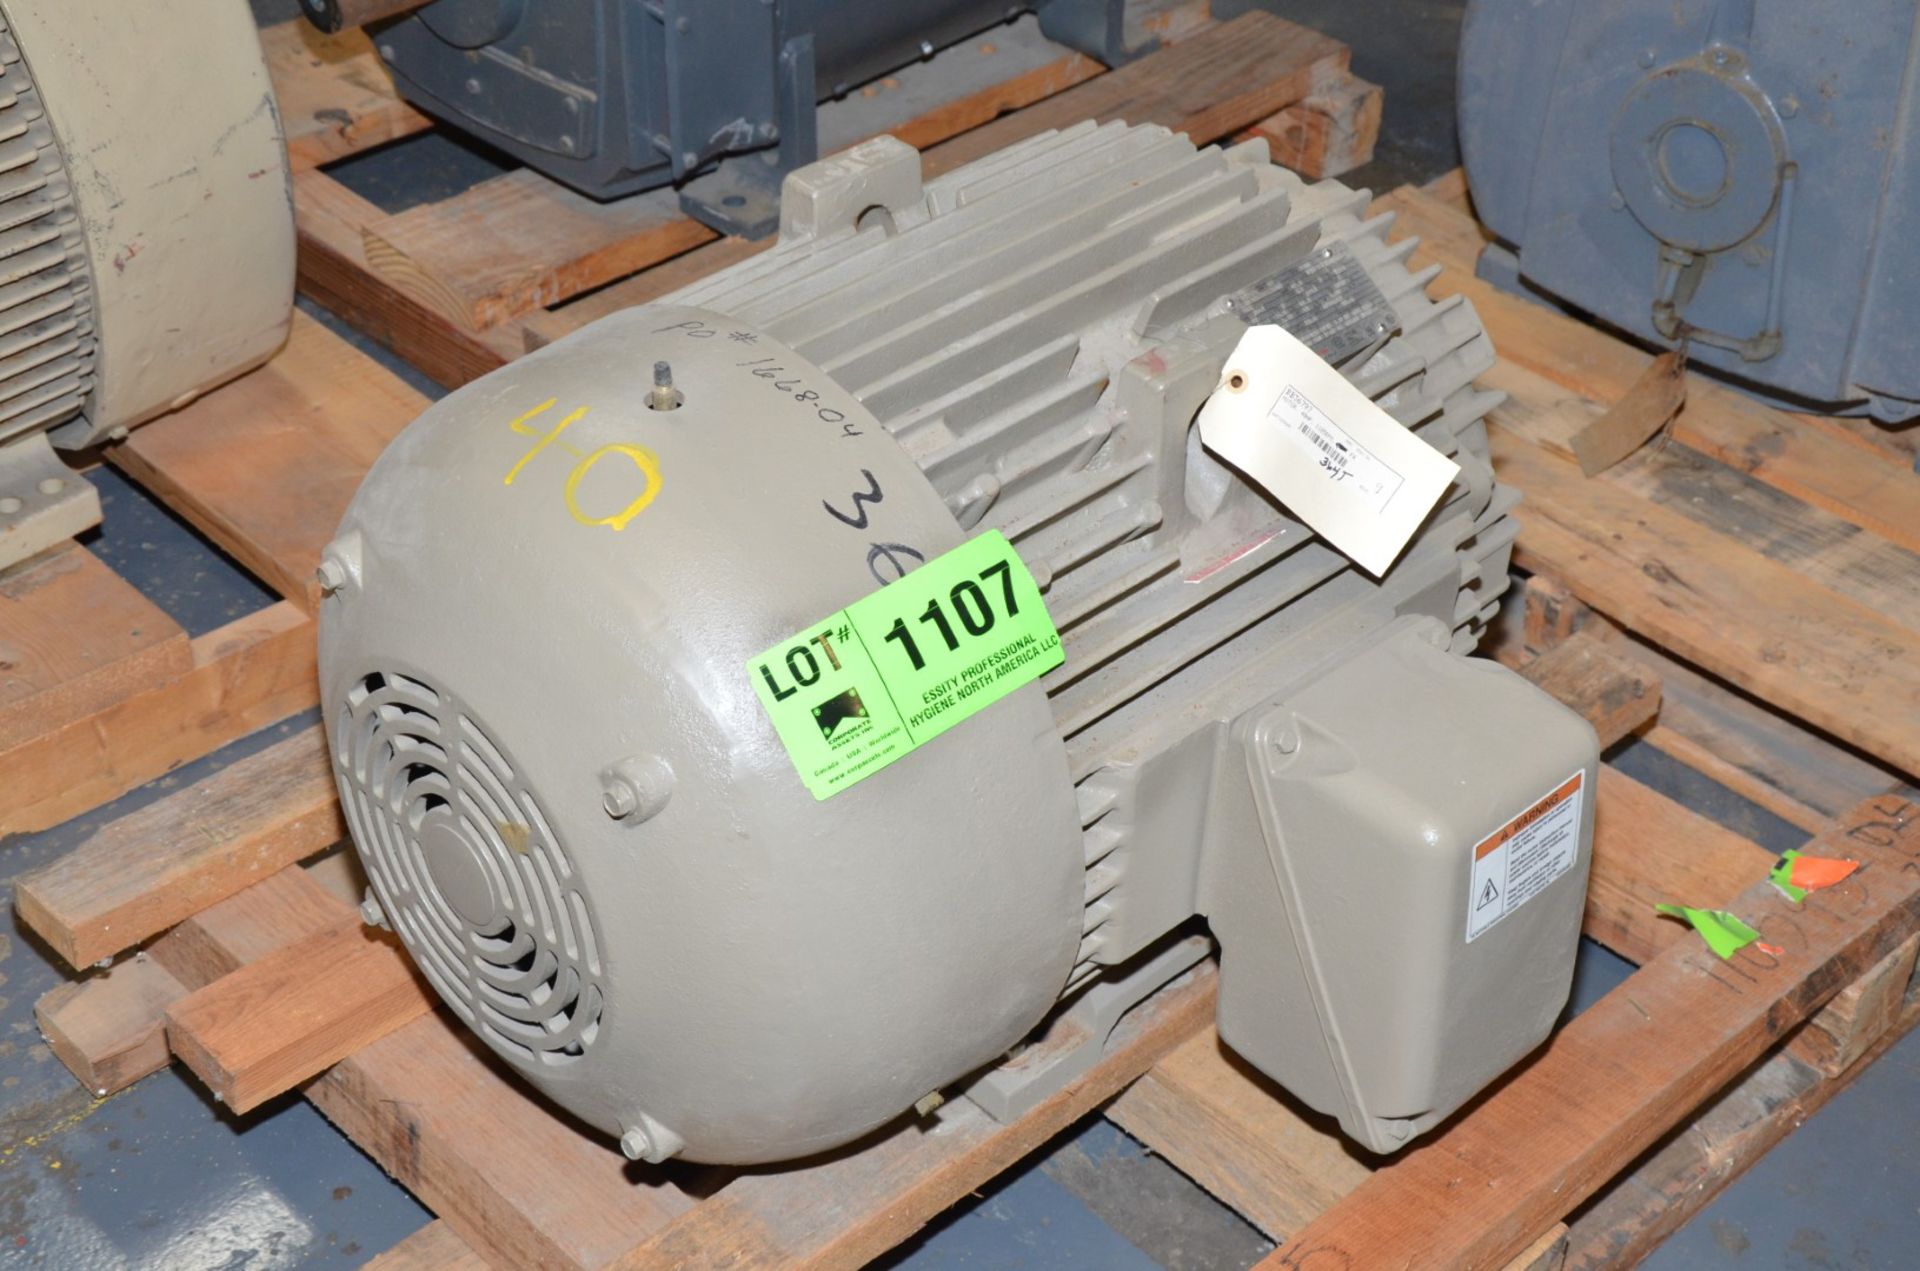 GE 40 HP 460V 1185 RPM ELECTRIC MOTOR [RIGGING FEE FOR LOT #1107 - $25 USD PLUS APPLICABLE TAXES]